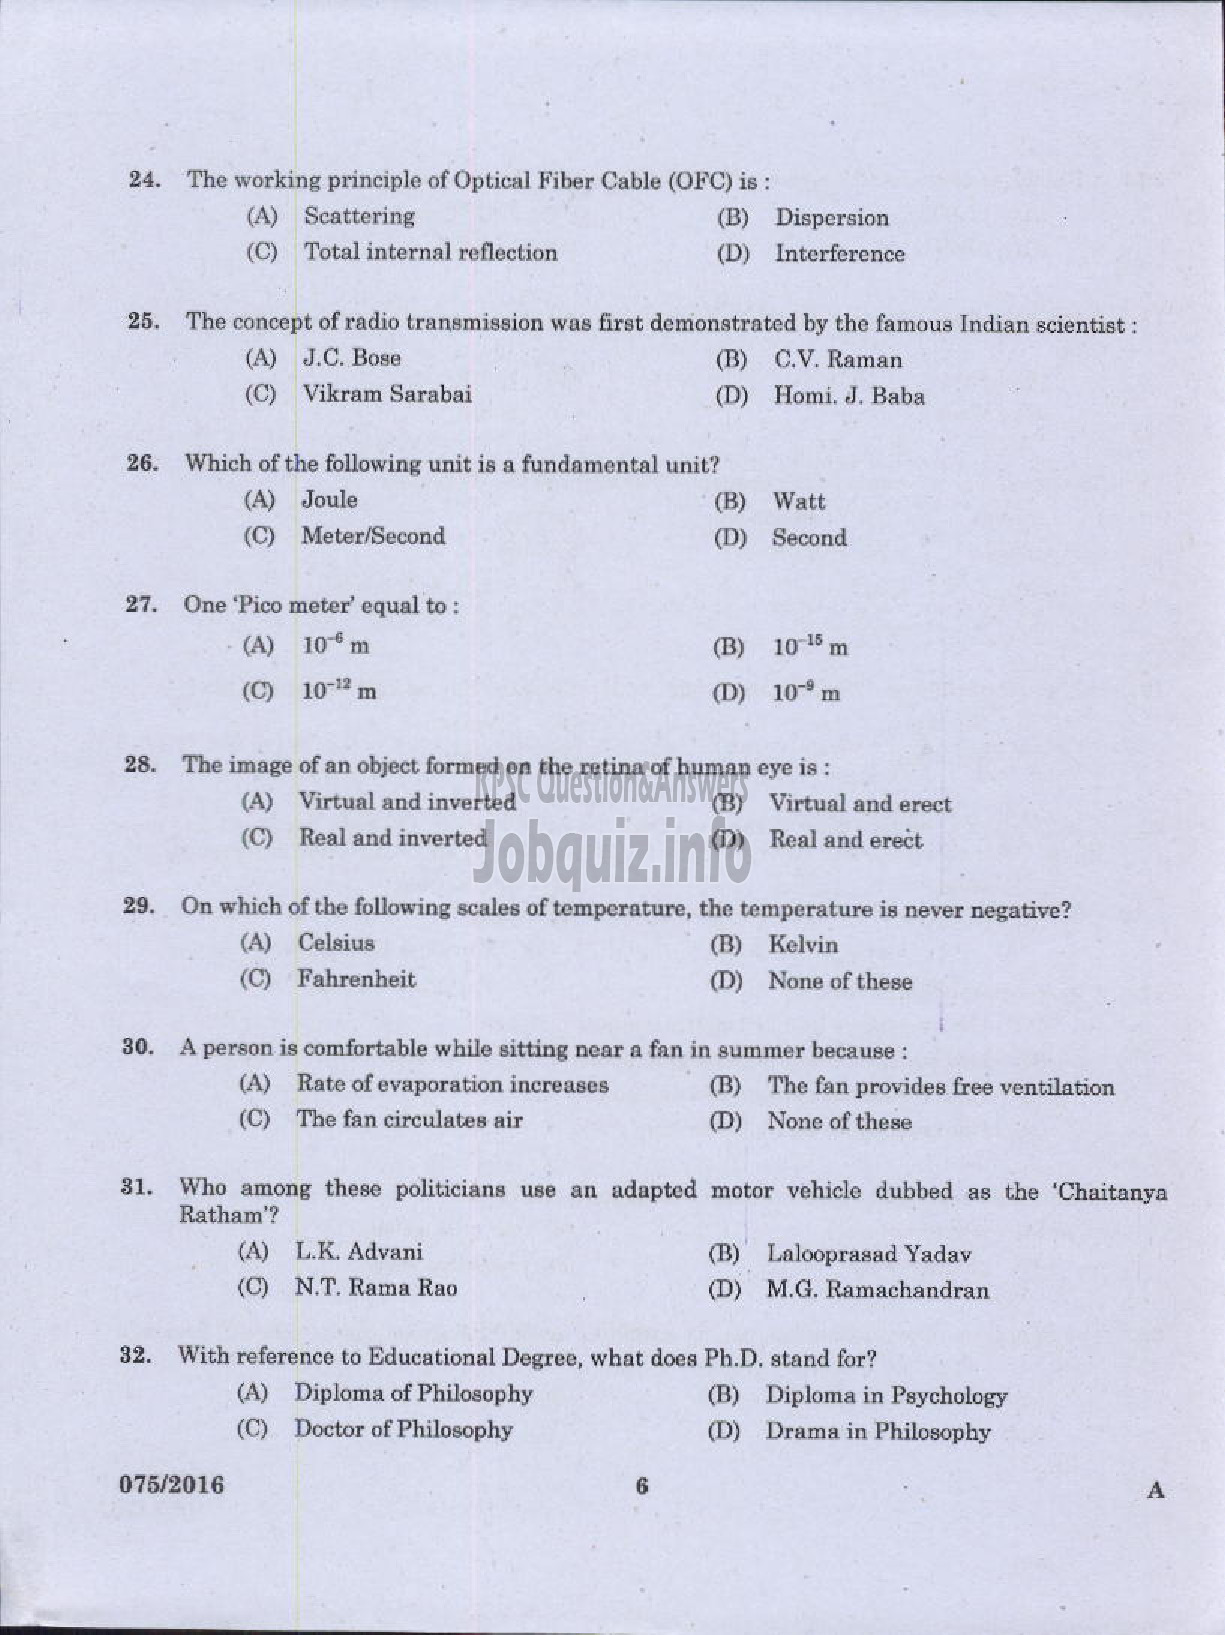 Kerala PSC Question Paper - WOMEN SUB INSPECTOR OF POLICE TRAINEE POLICE-4